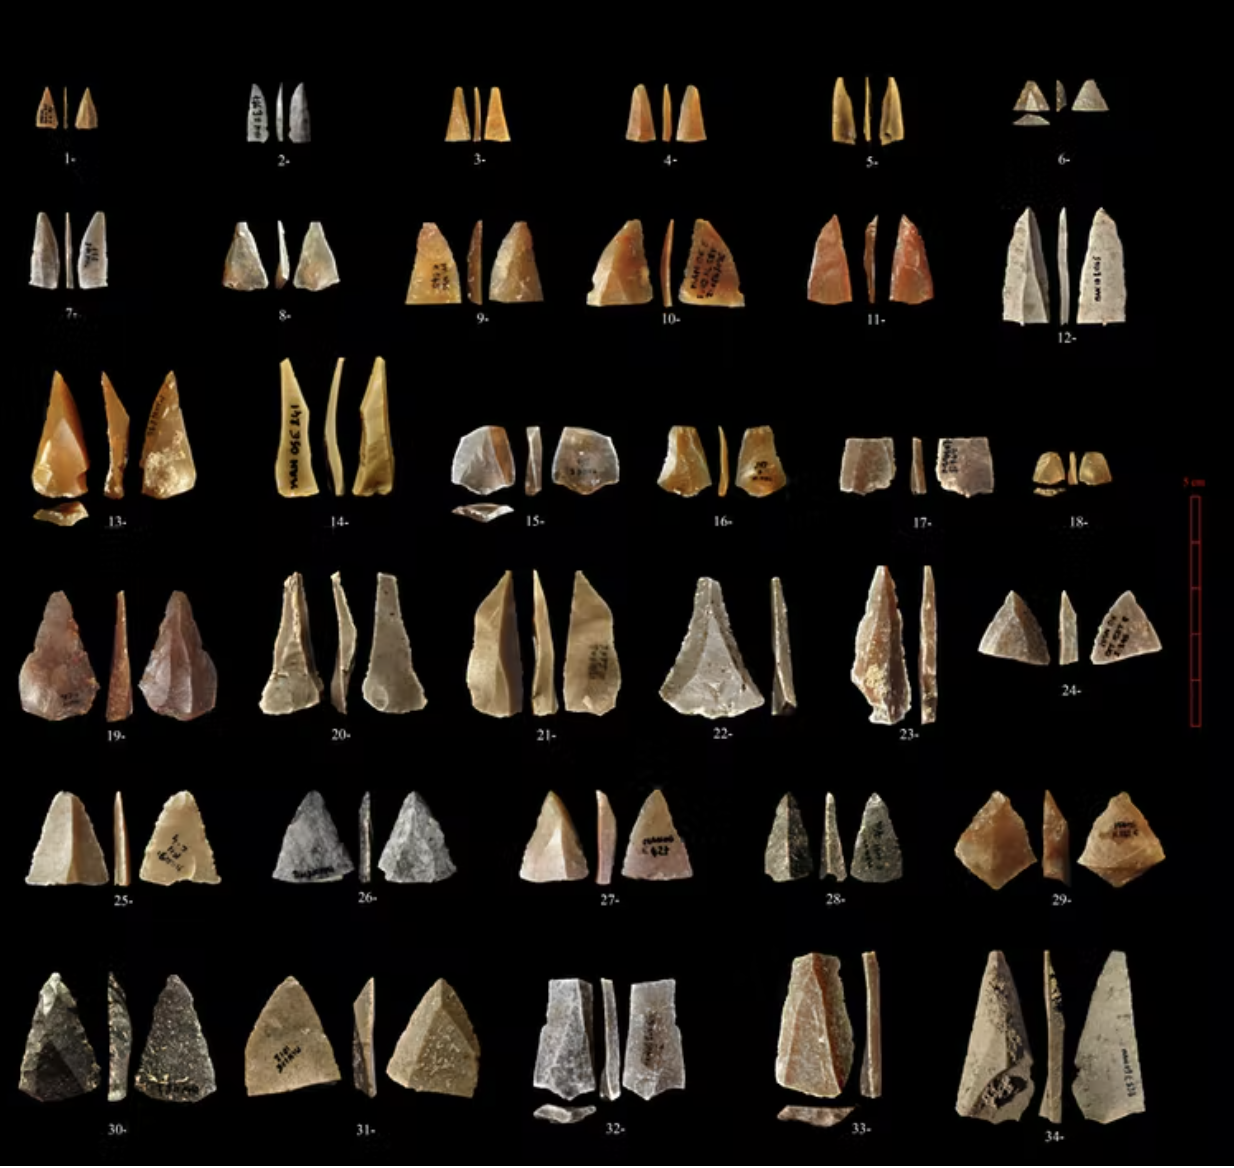 These Neronian points have no equivalent technology among the Neanderthal groups that lived before and after the arrival of the first modern humans in Grotte Mandrin. Laure Metz and Ludovic Slimak, CC BY-ND